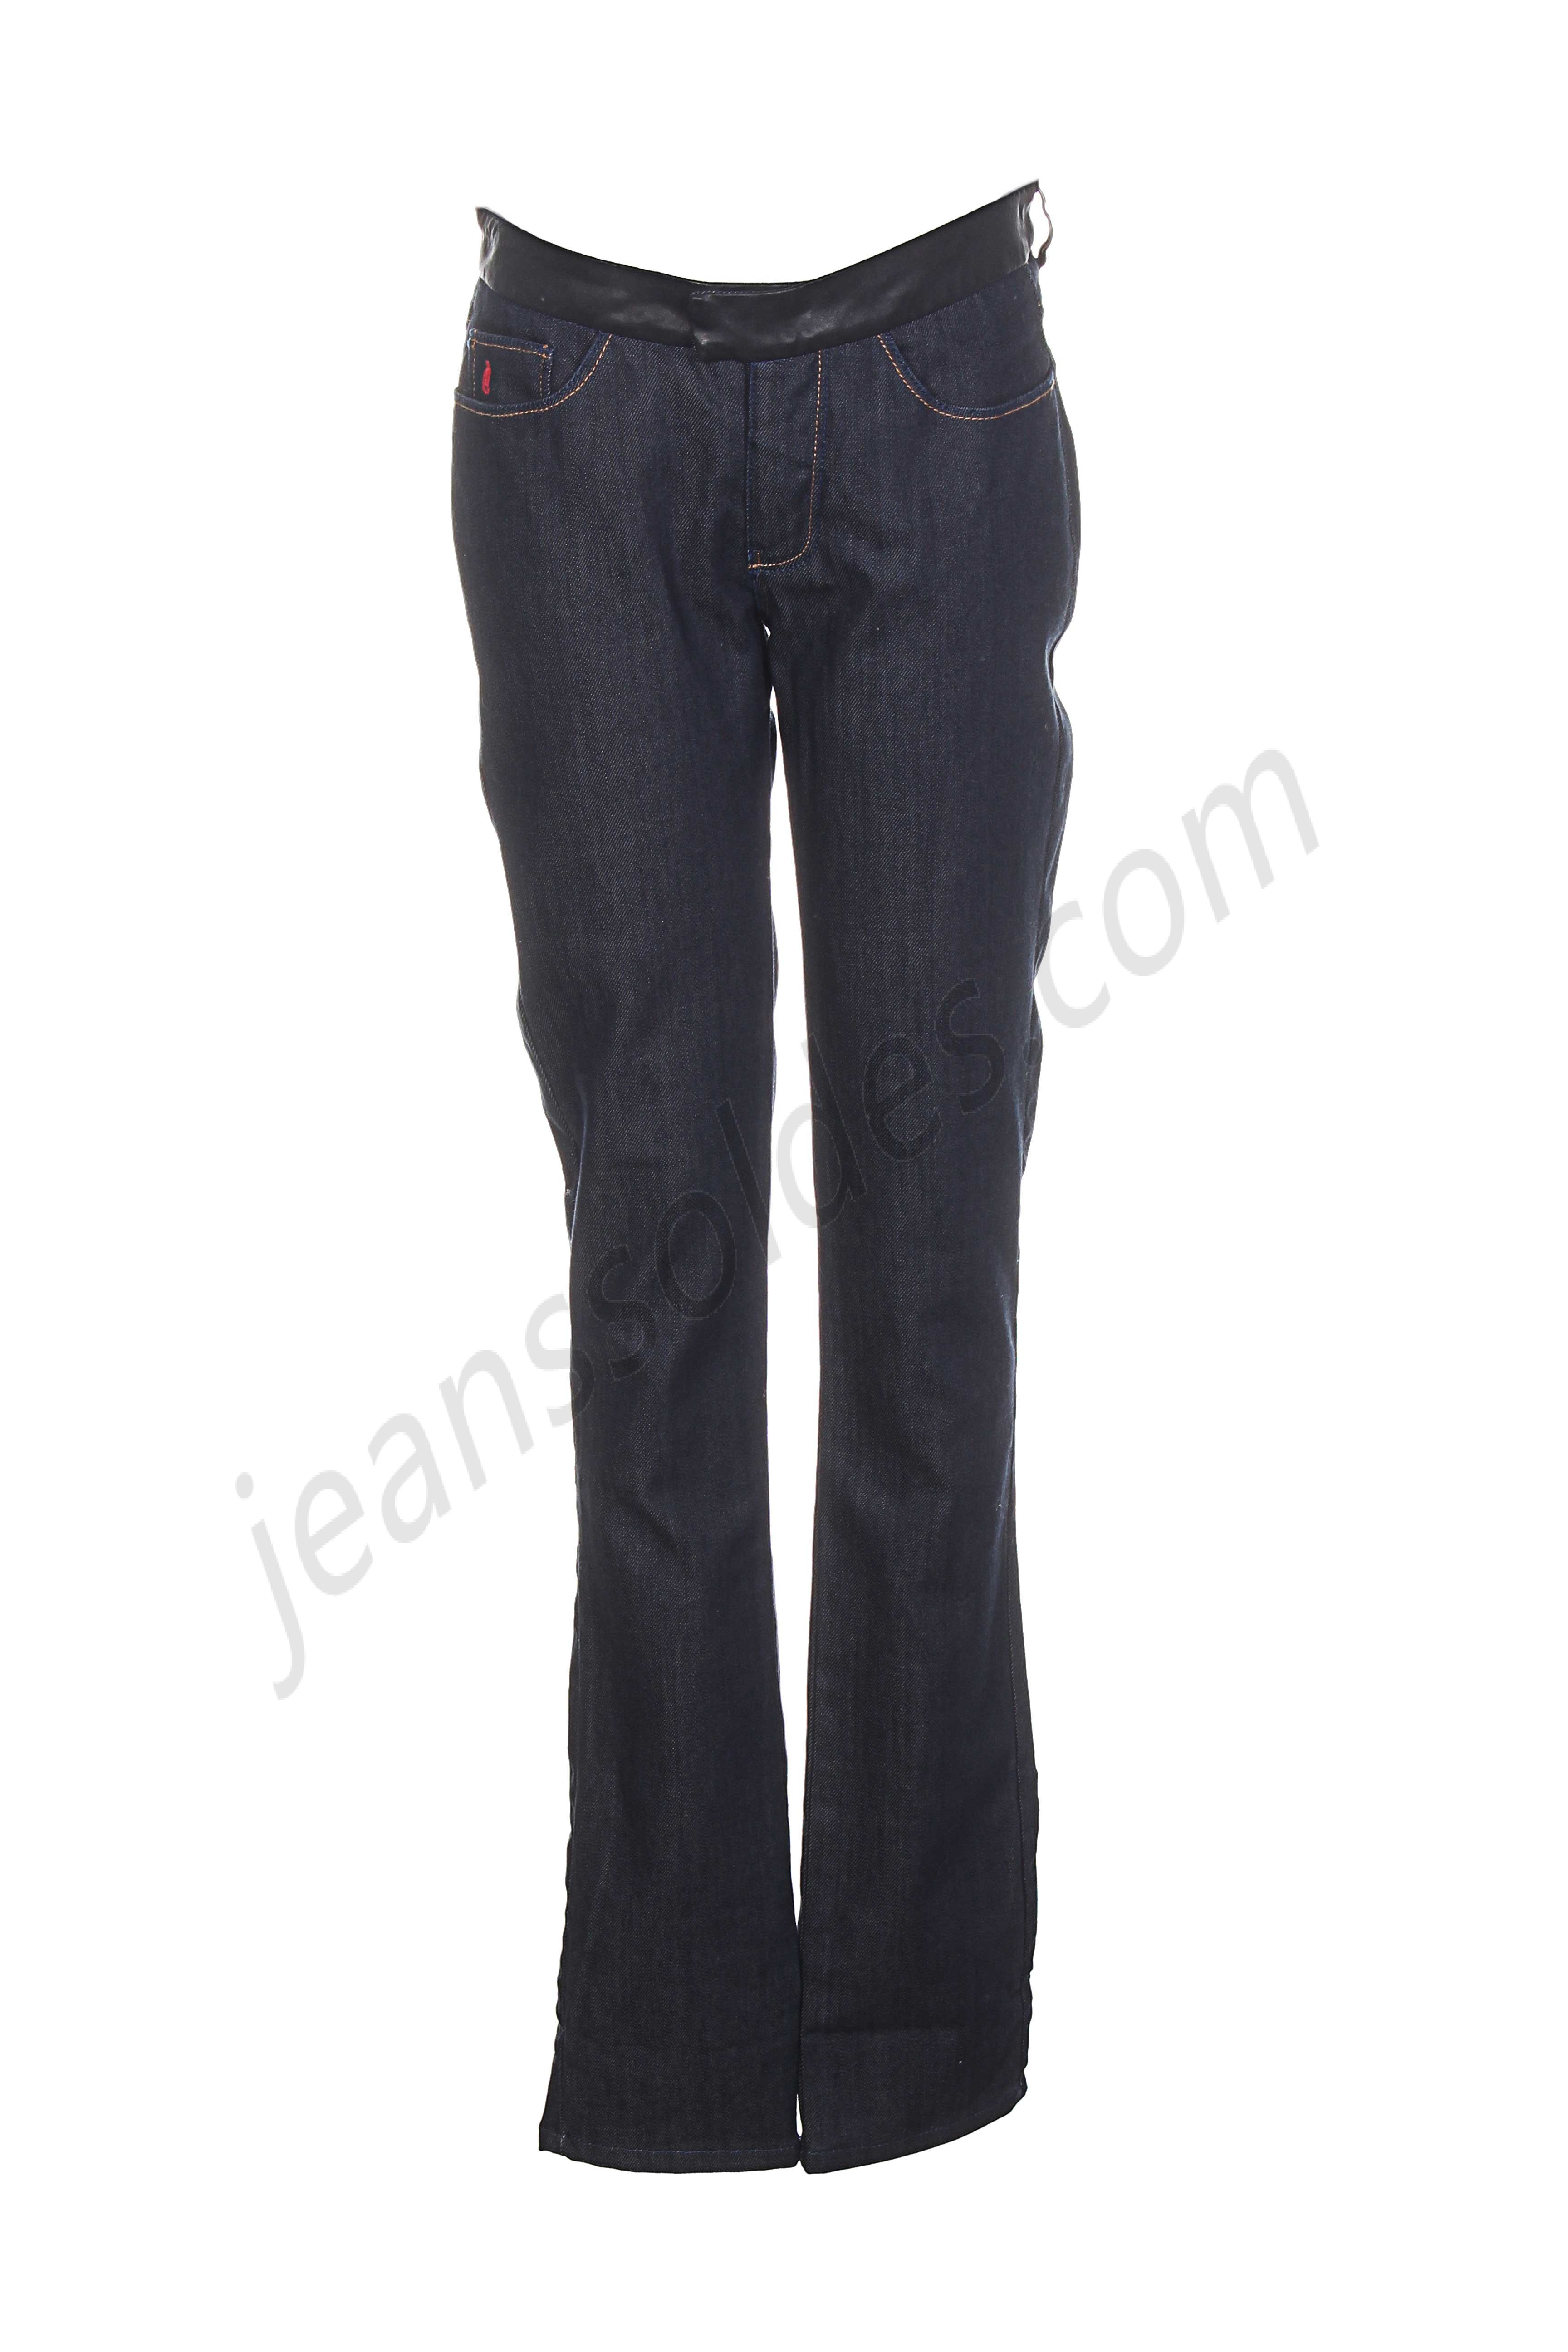 i.code (by ikks)-Jeans coupe slim prix d’amis - i.code (by ikks)-Jeans coupe slim prix d’amis